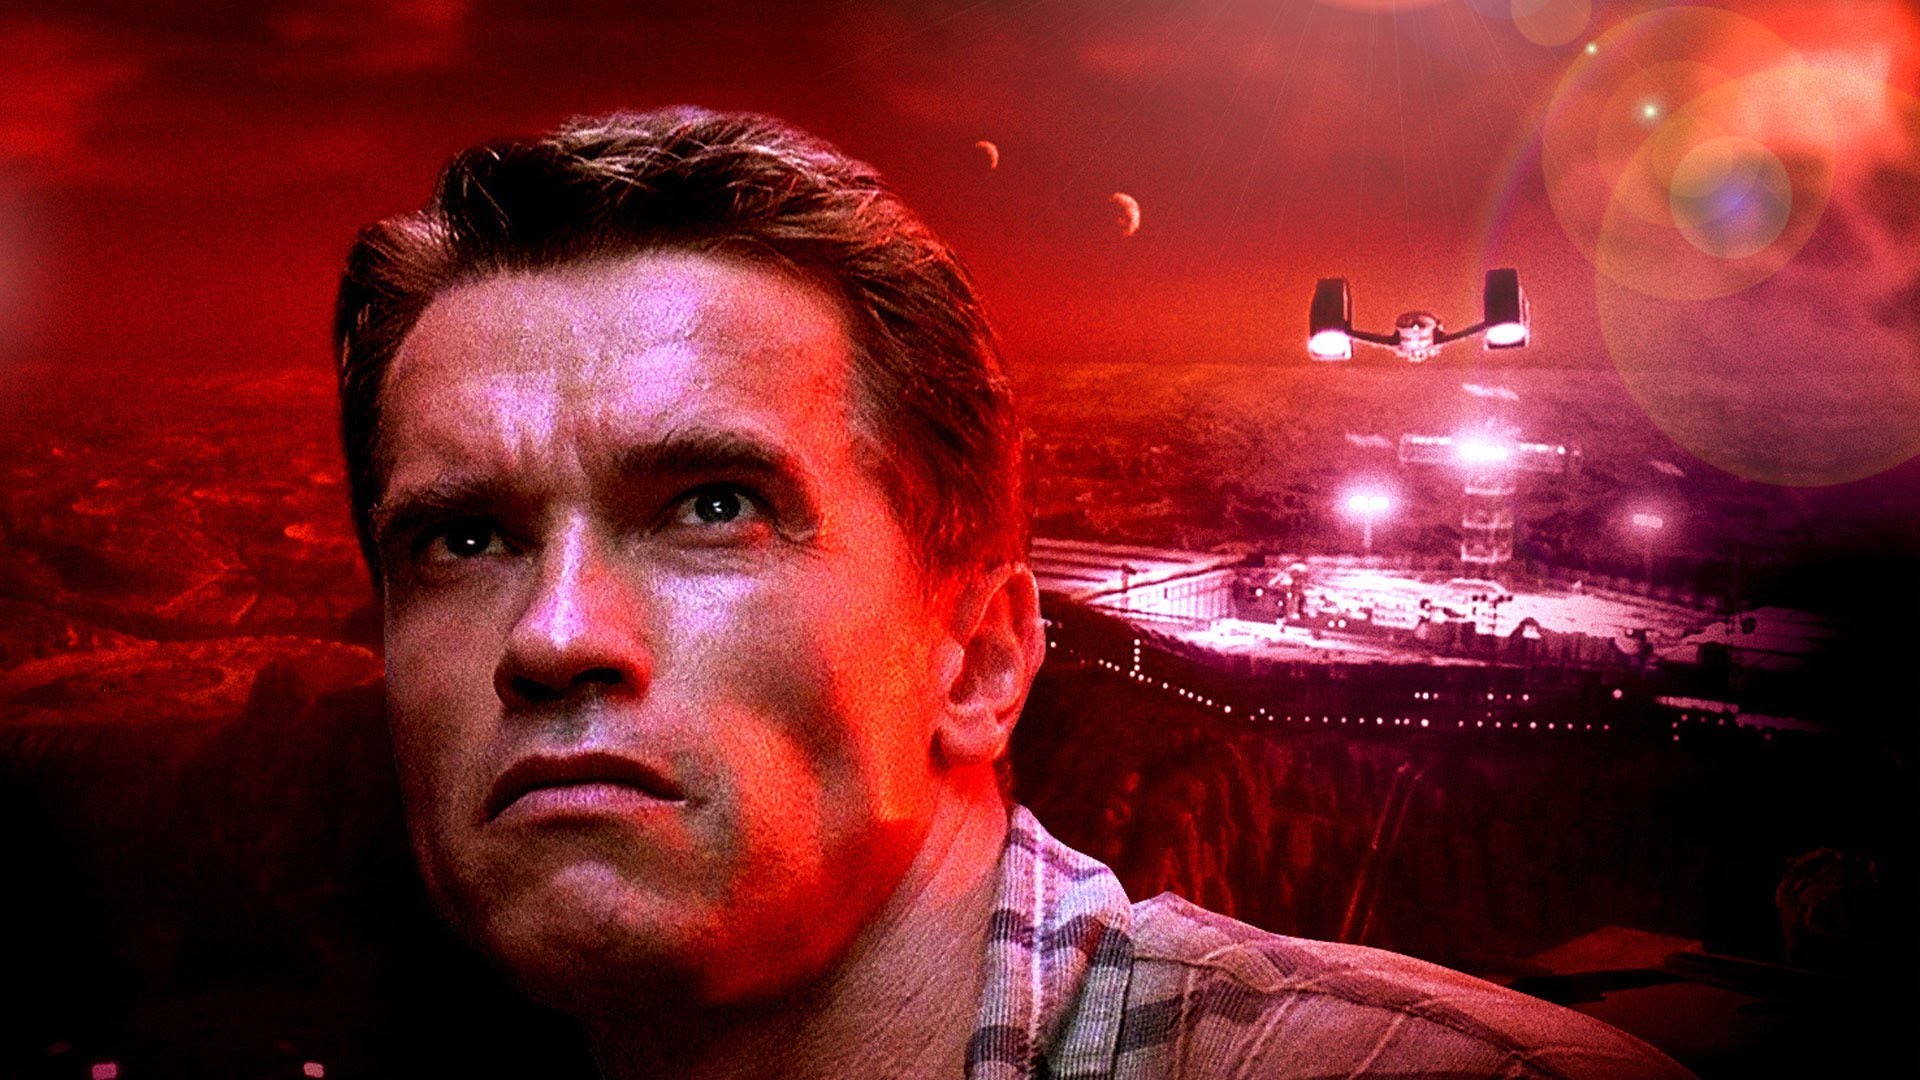 Total Recall (1990) Backgrounds, Compatible - PC, Mobile, Gadgets| 1920x1080 px